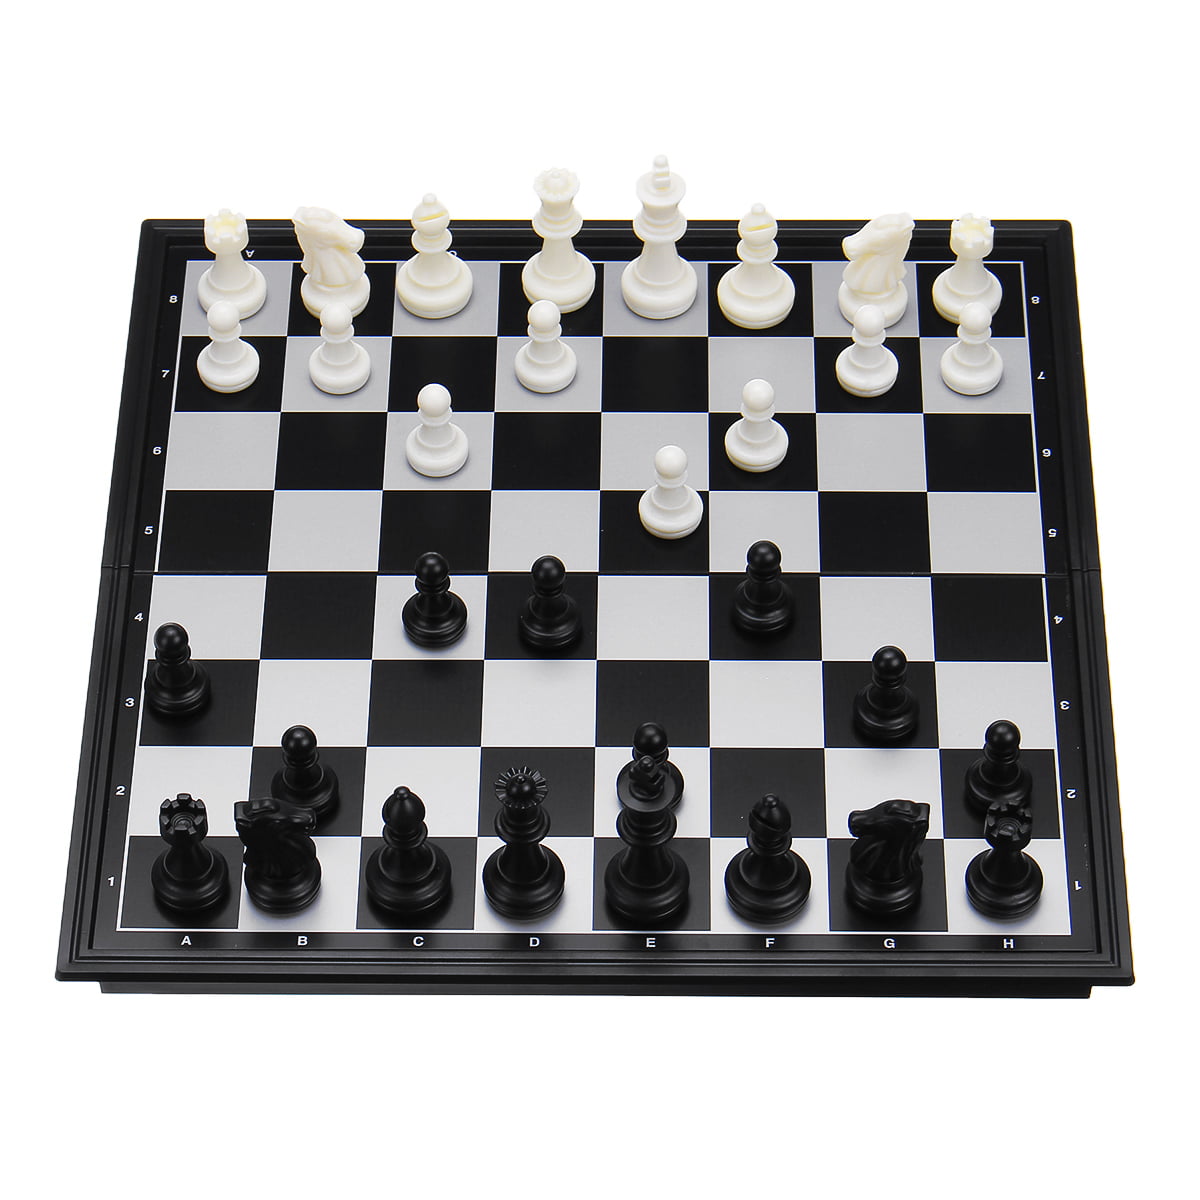 Easy to Storage and Carry 3 in 1 Staunton Chess Set Perfect Learning Toys for Kids and Adults Magnetic Chess & Checkers & Backgammon Pieces Peradix Magnetic Folding Travel Chess Board 